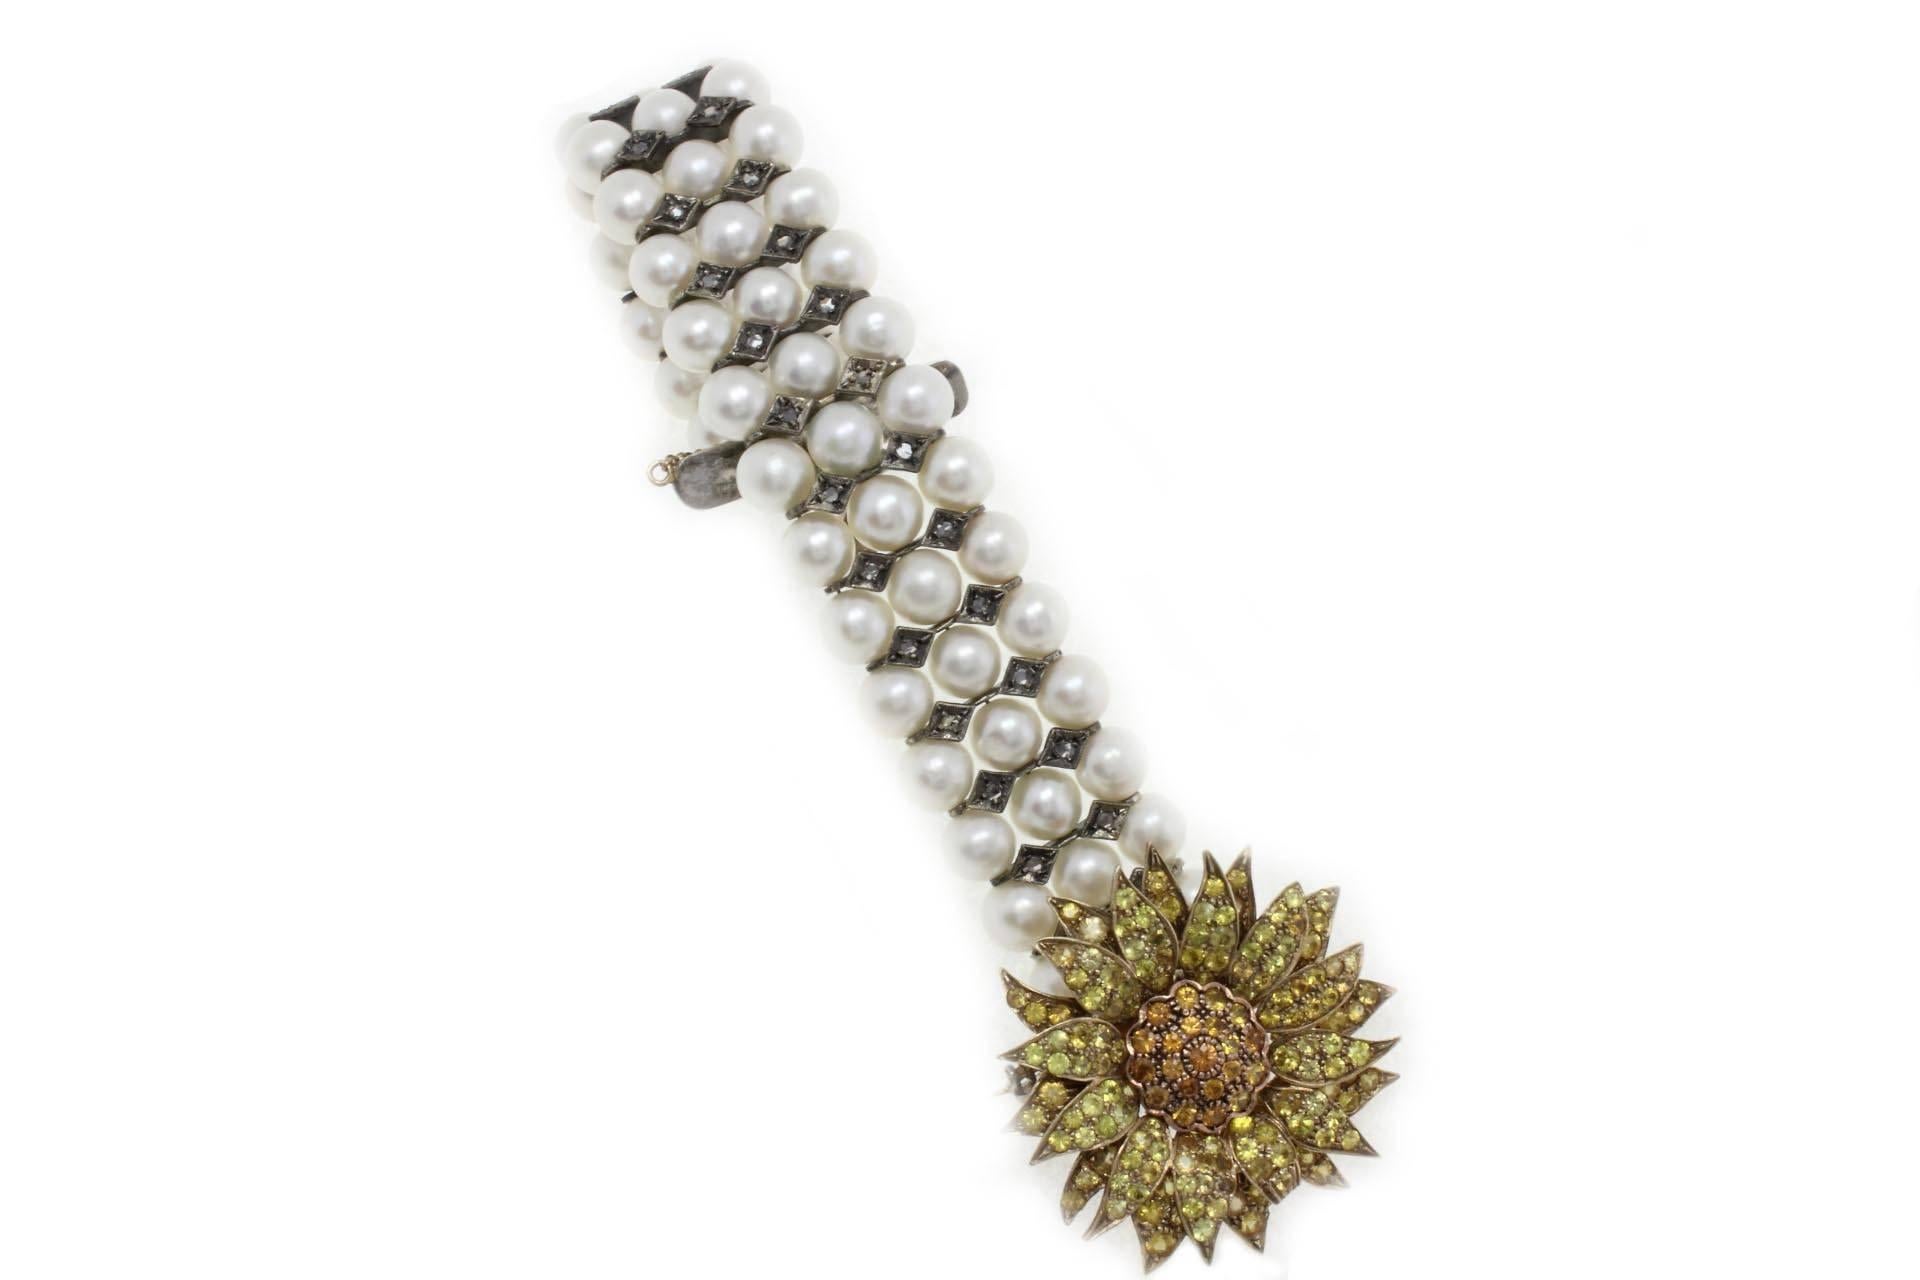 Pearls bracelet with sunflower shaped clasp in 9 kt yellow gold and silver mounted with natural rose cut diamonds and sapphires.
Pearls (40.50 gr) 
diamonds (0.62 kt) 
sapphires (6.71 kt)
tot. weight 79.20
r.f  griu

For any enquires, please contact